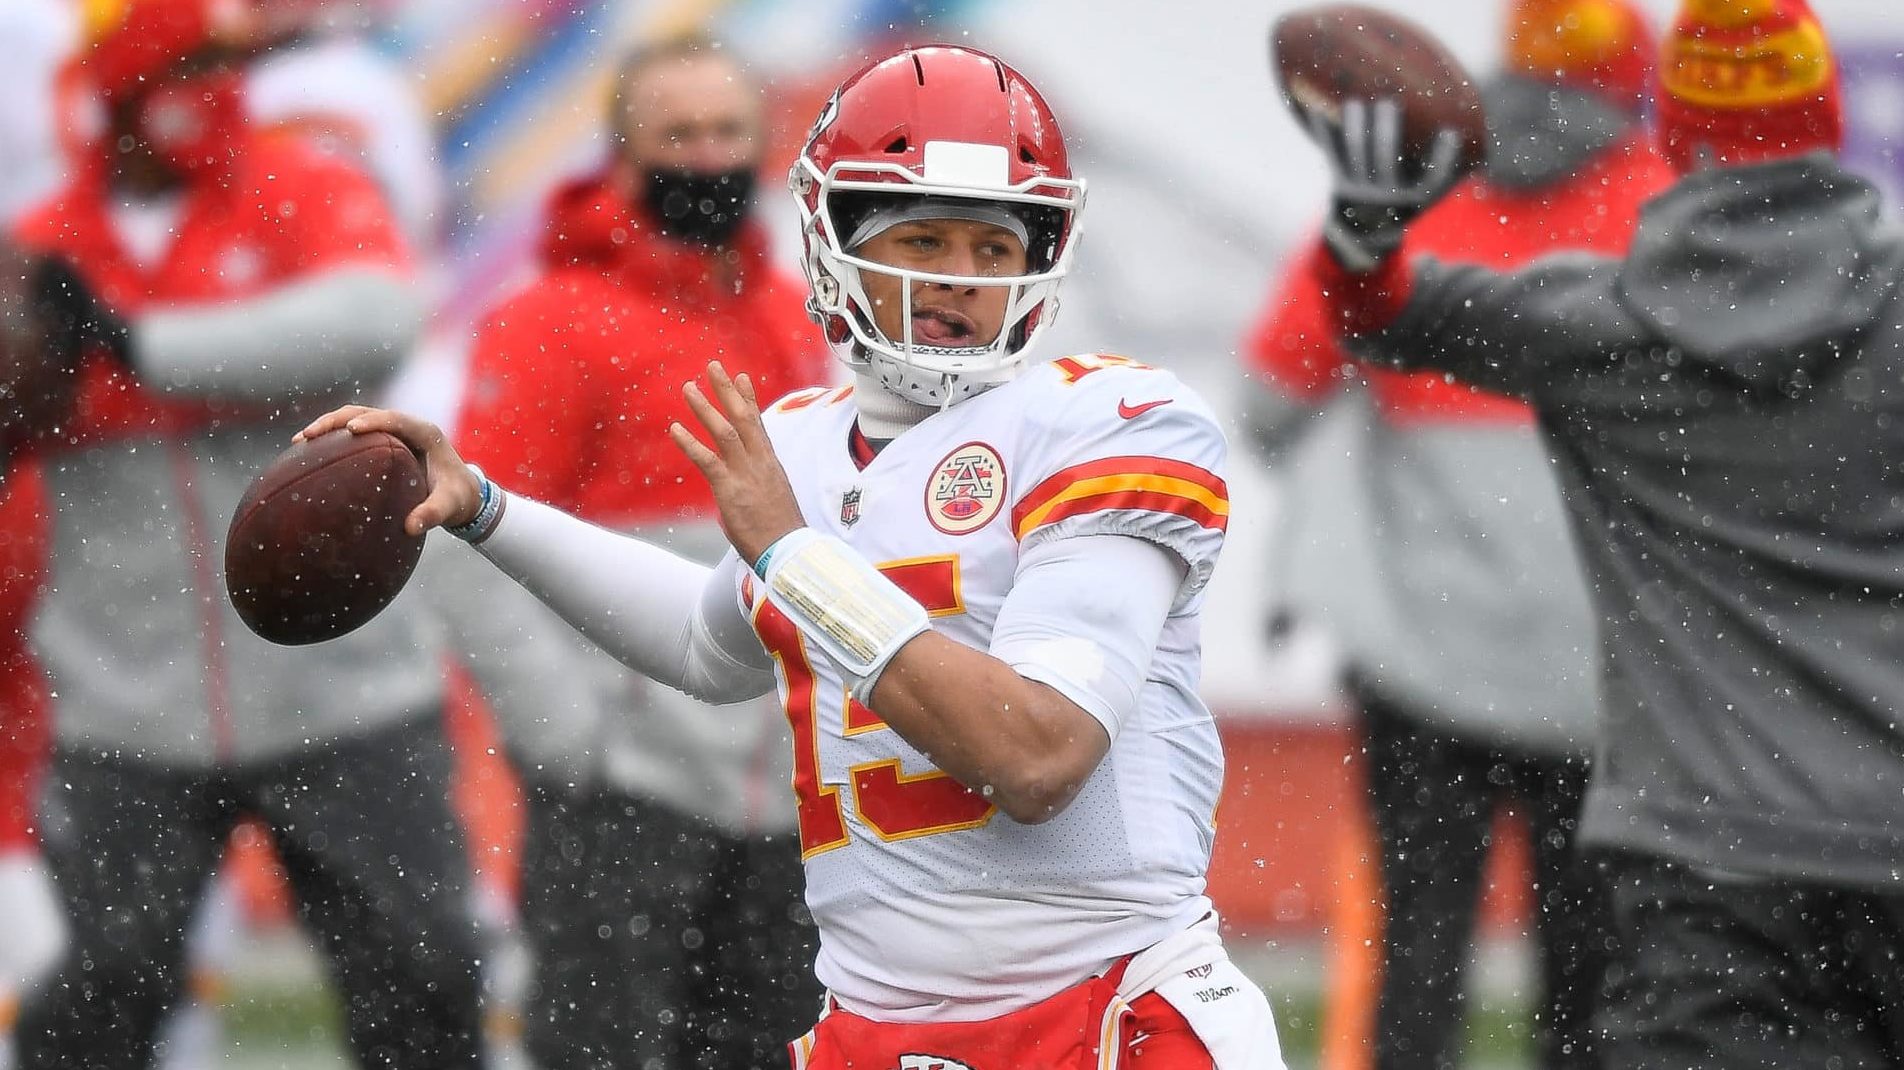 DENVER, CO - OCTOBER 25: Patrick Mahomes #15 of the Kansas City Chiefs throws to warm up before a game against the Denver Broncos at Empower Field at Mile High on October 25, 2020 in Denver, Colorado.